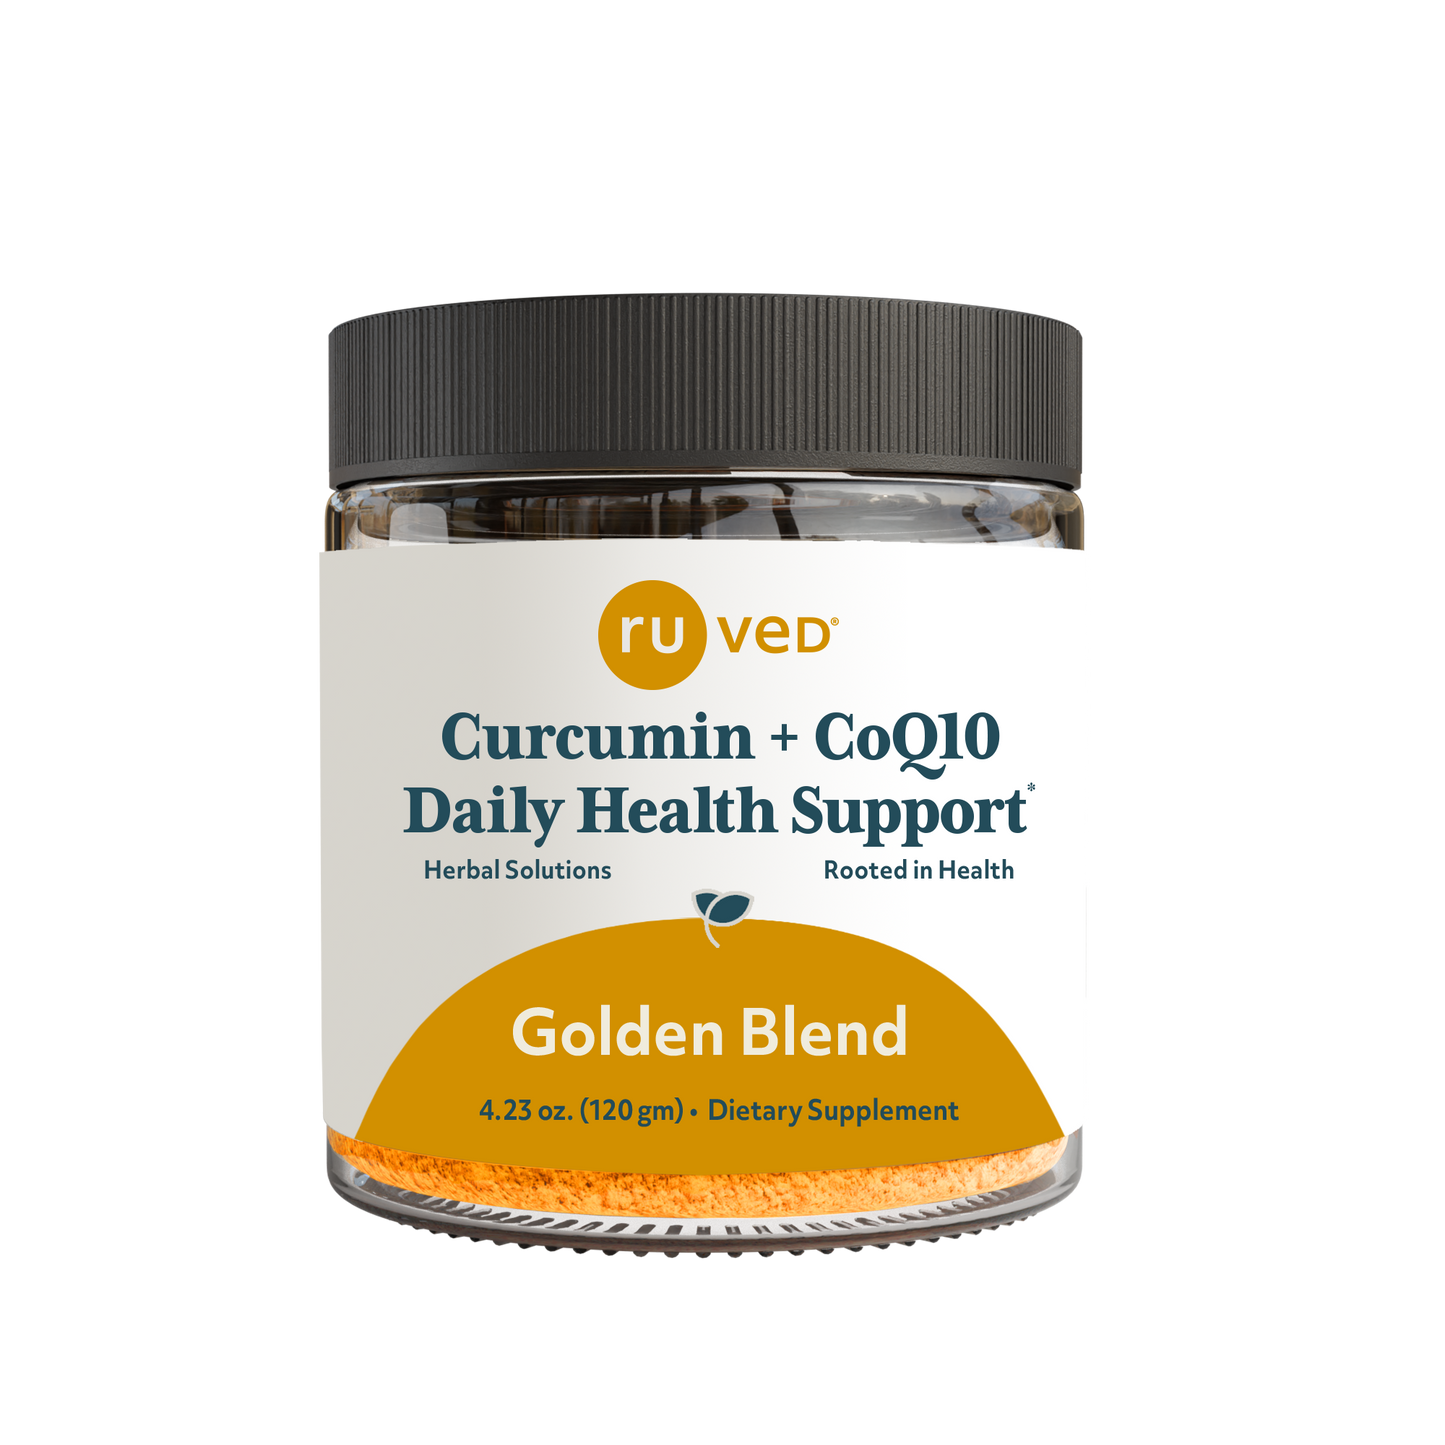 Golden Blend - Curcumin + CoQ10 Daily Health Support by ruved herbal supplements and ayush herbs